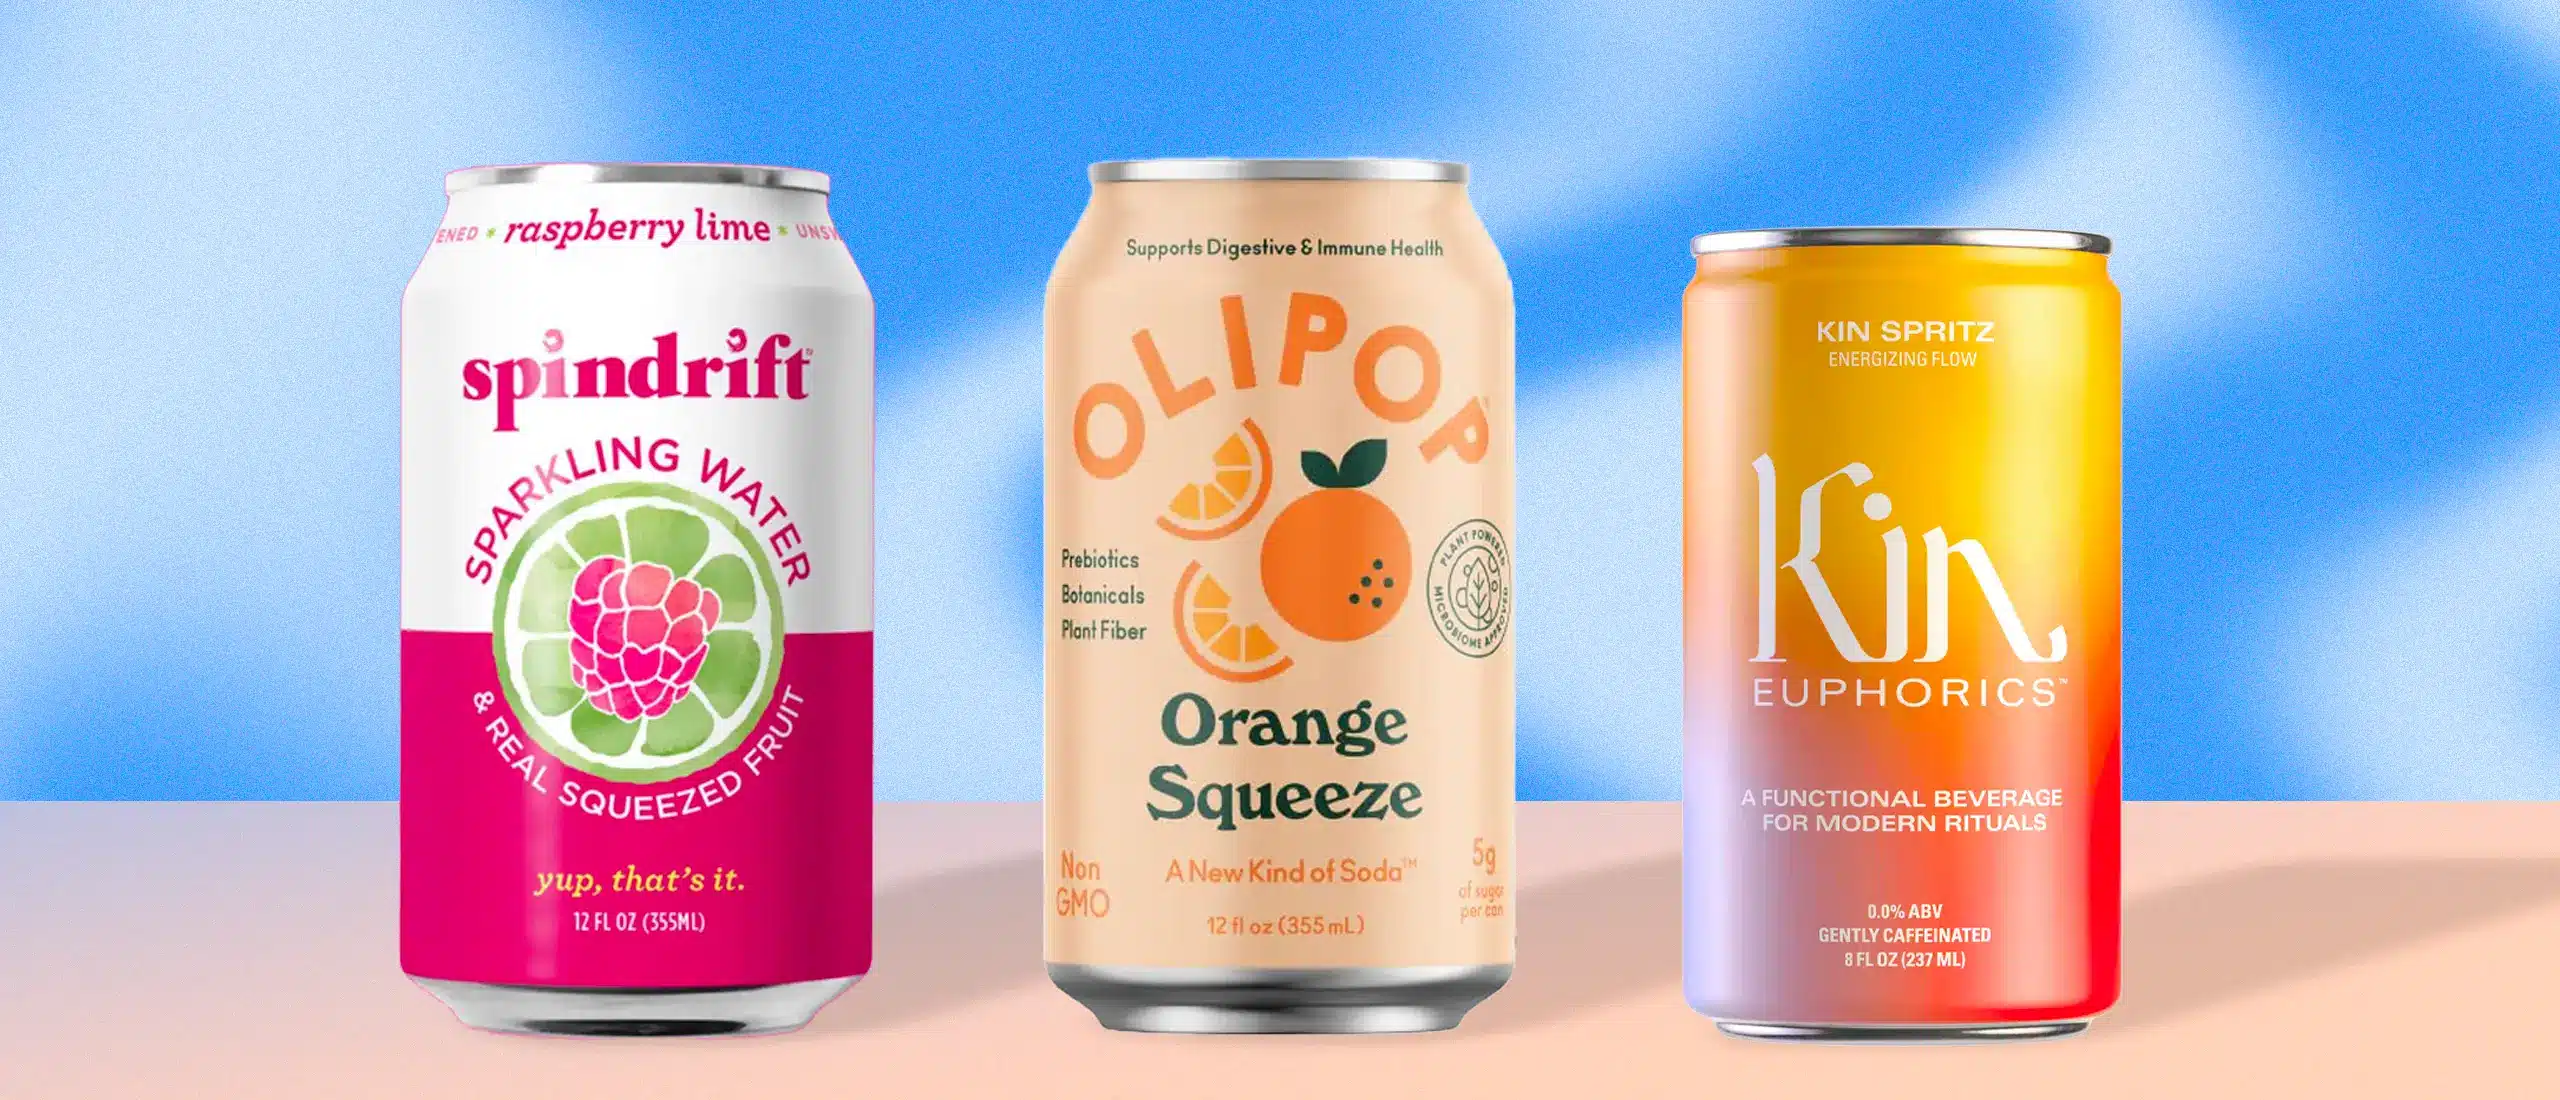 Spindrift, Olipop, and Kin Spritz, a few of the most popular healthiest soda brands lined up.